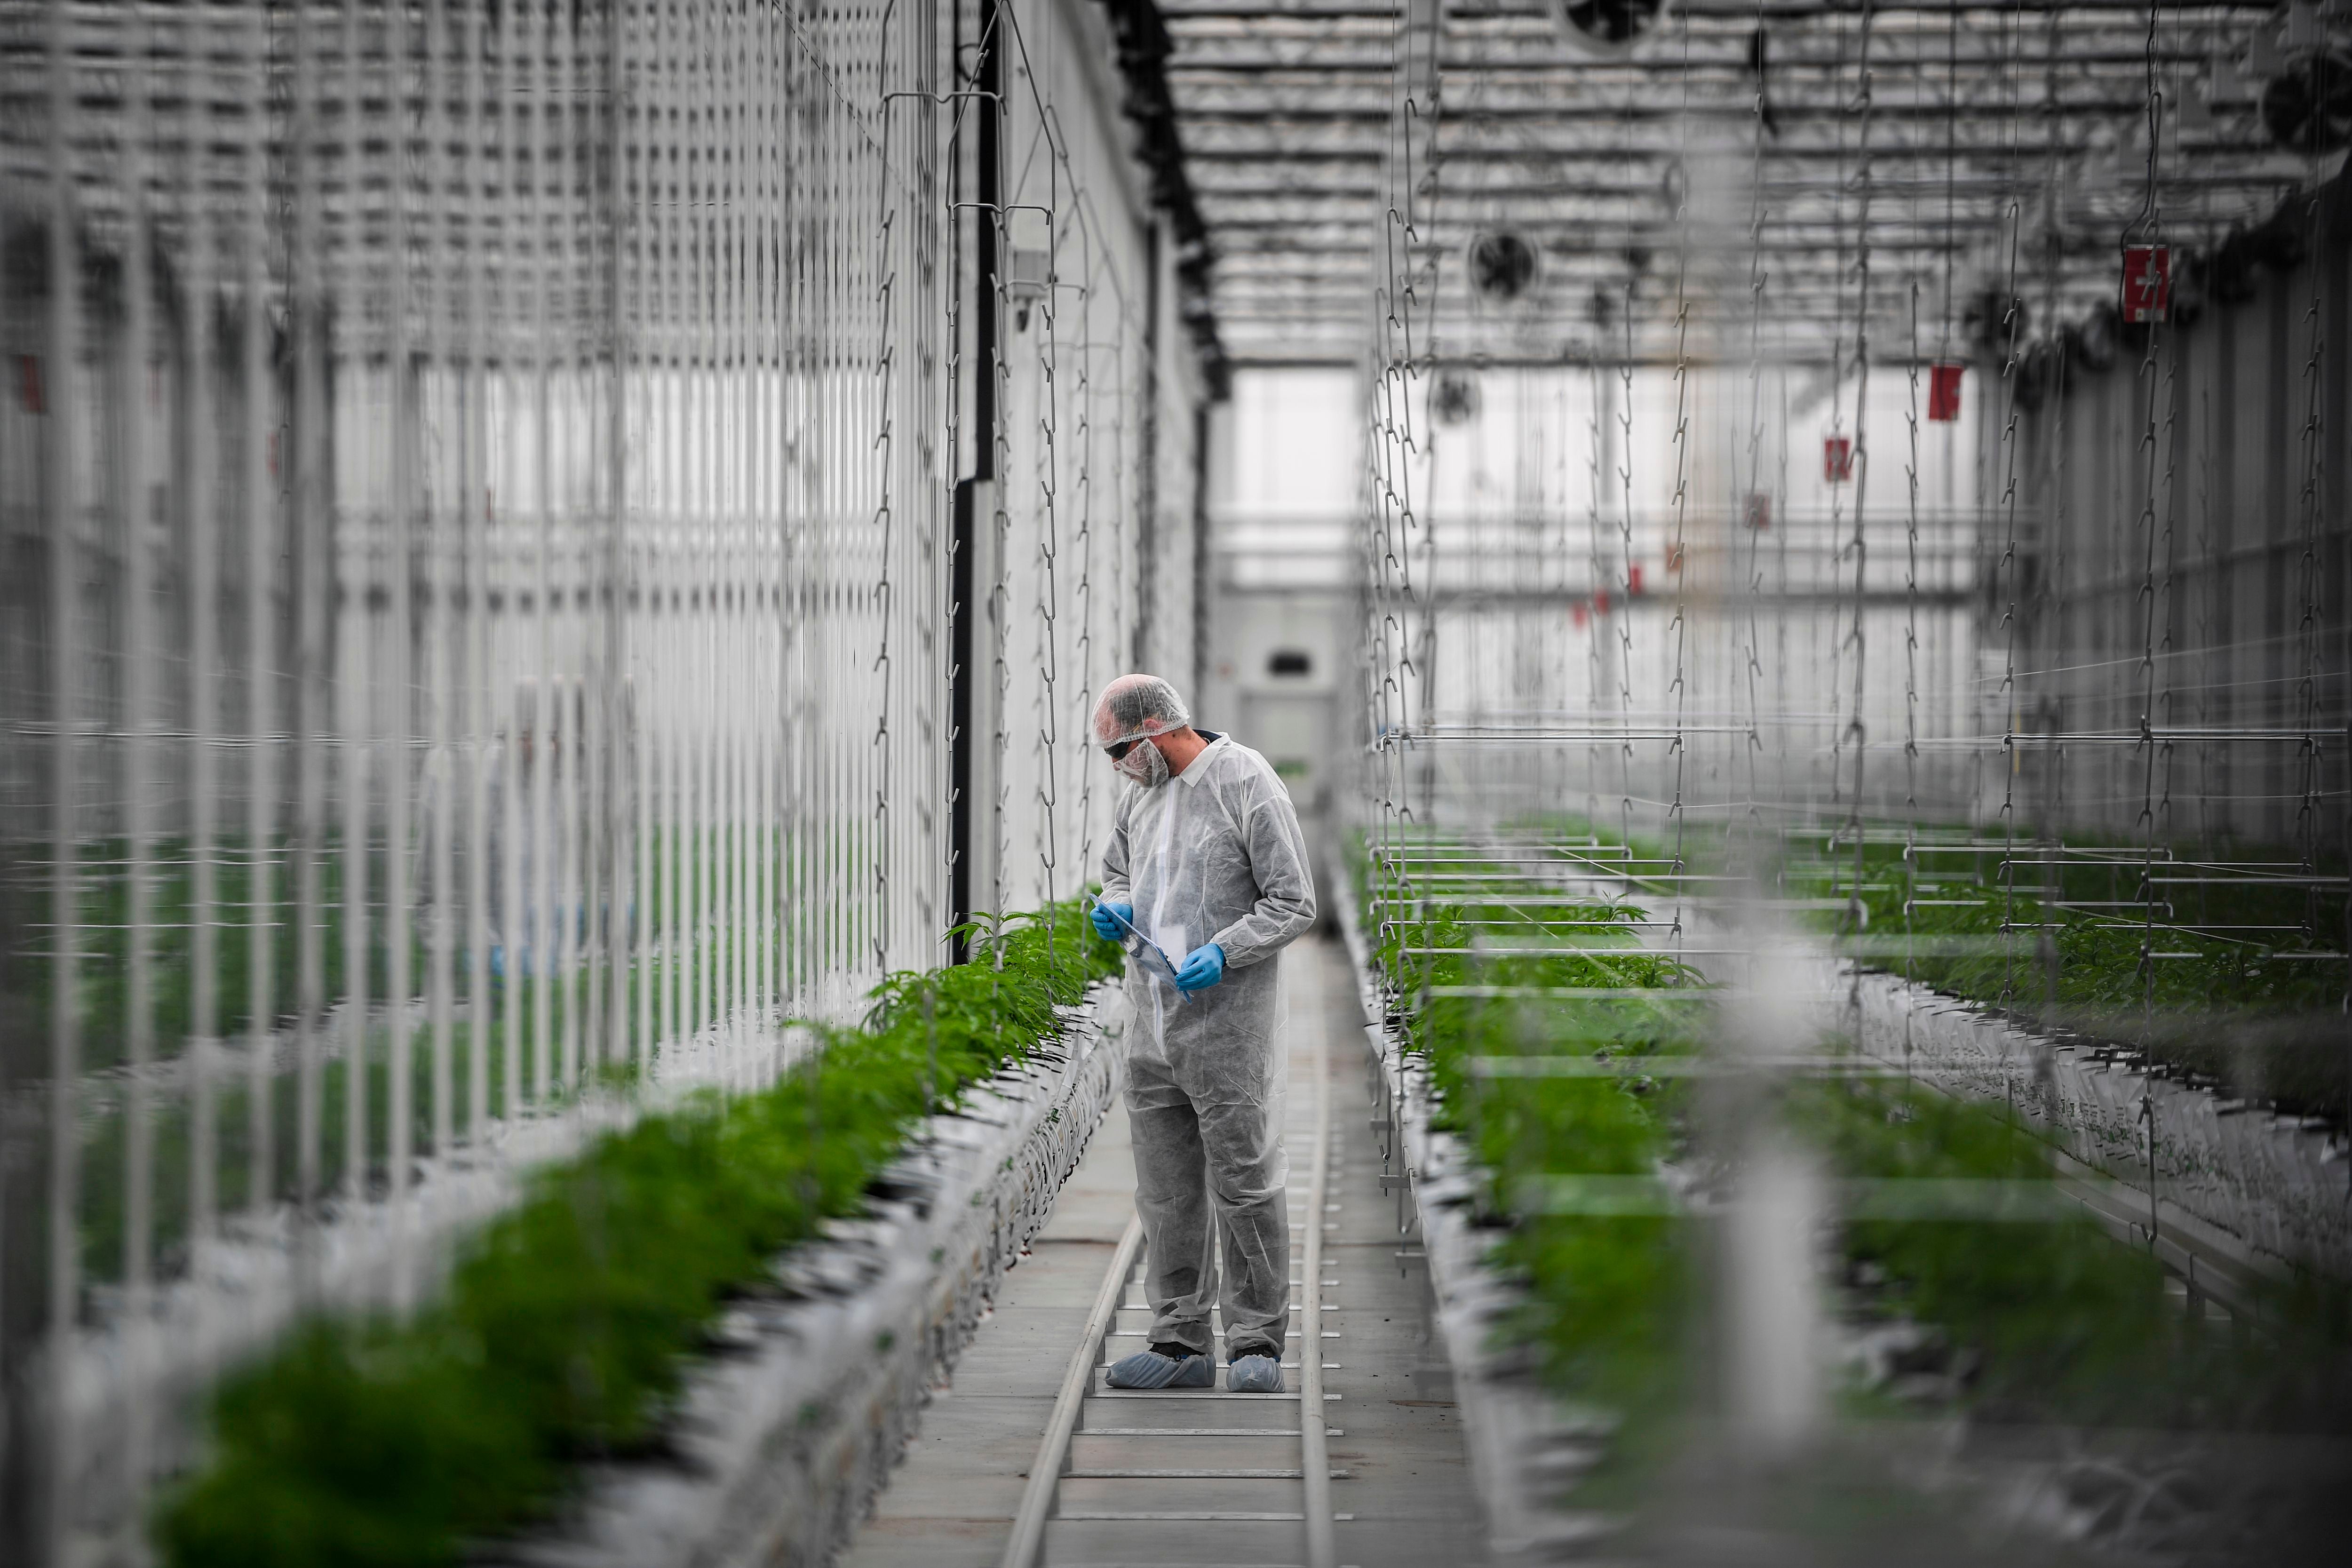 A worker checks cannabis plants in a greenhouse in Cantanhede, Portugal. The Tilray medical company aims to become a world leader in the production of therapeutic cannabis&nbsp;